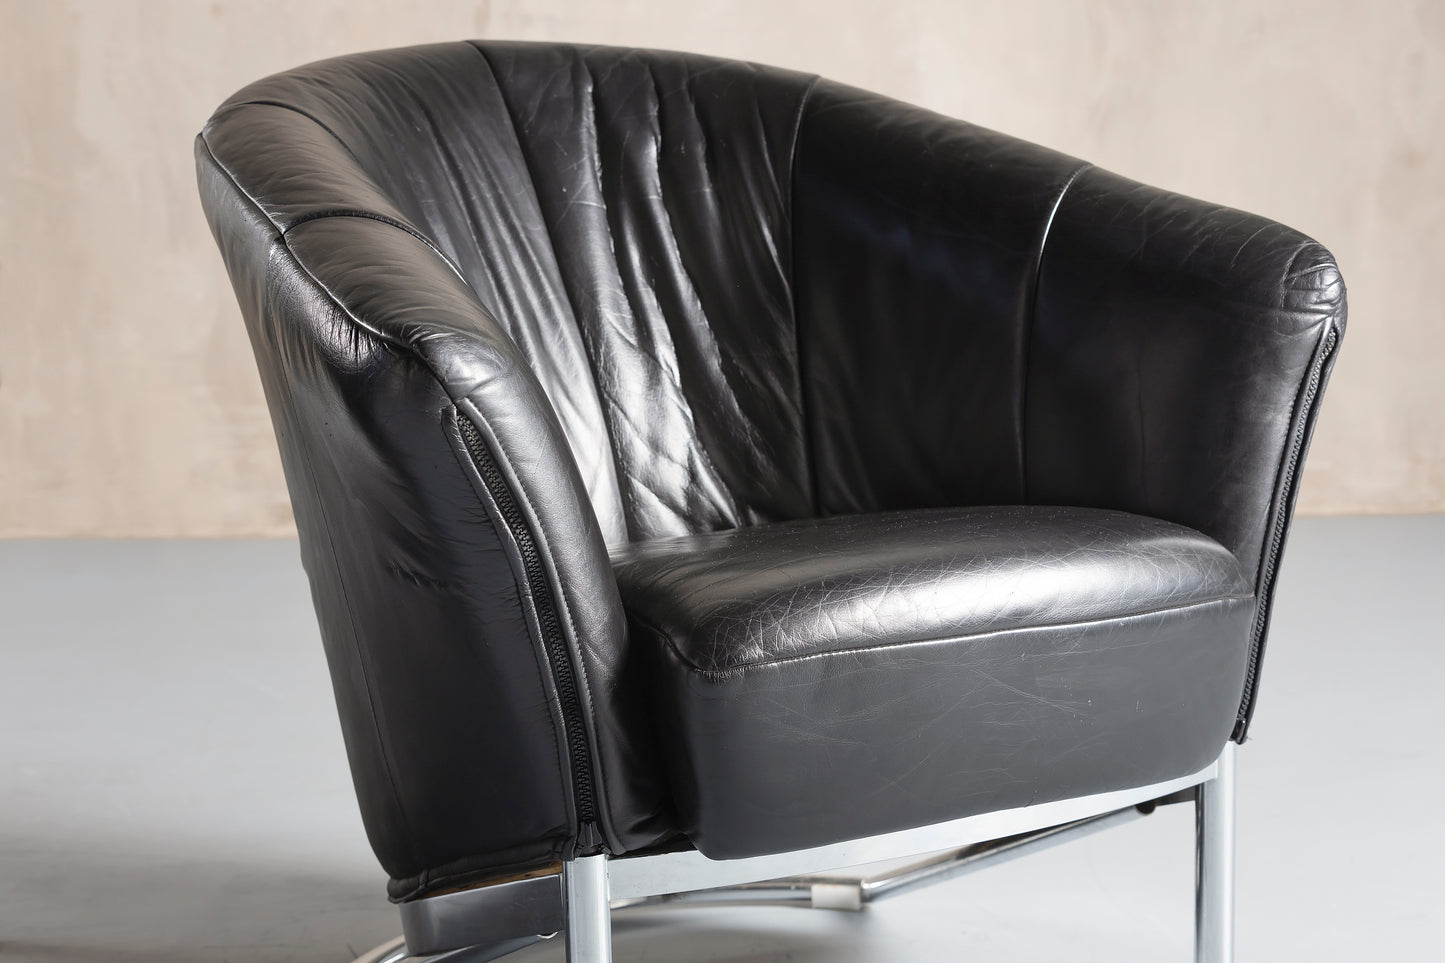 Classic black leather chair